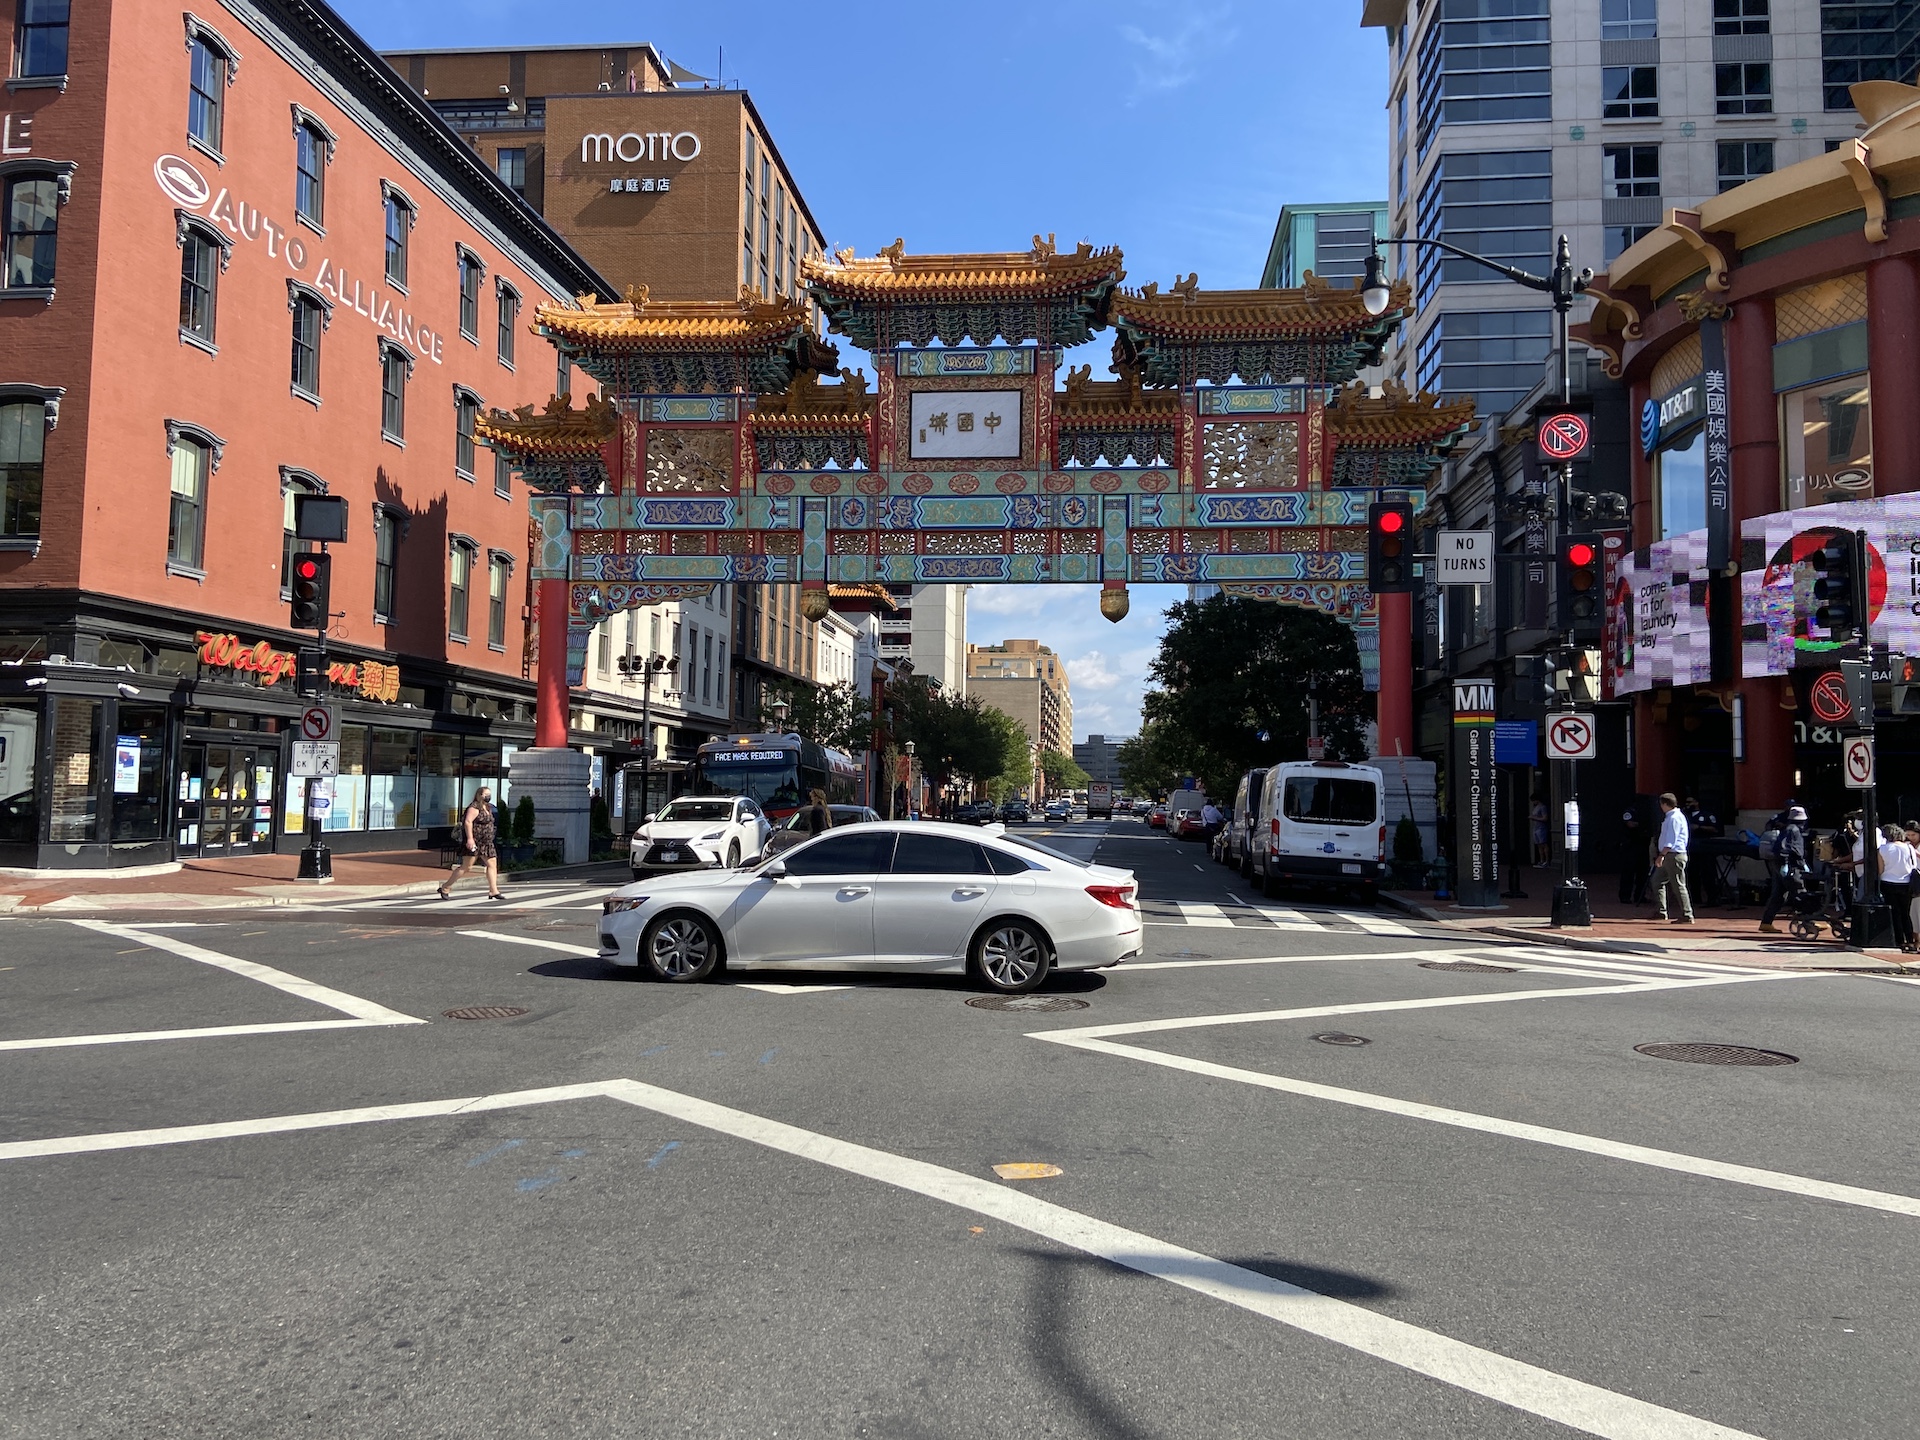 A picture of the Friendship Gate in DC's Chinatown.